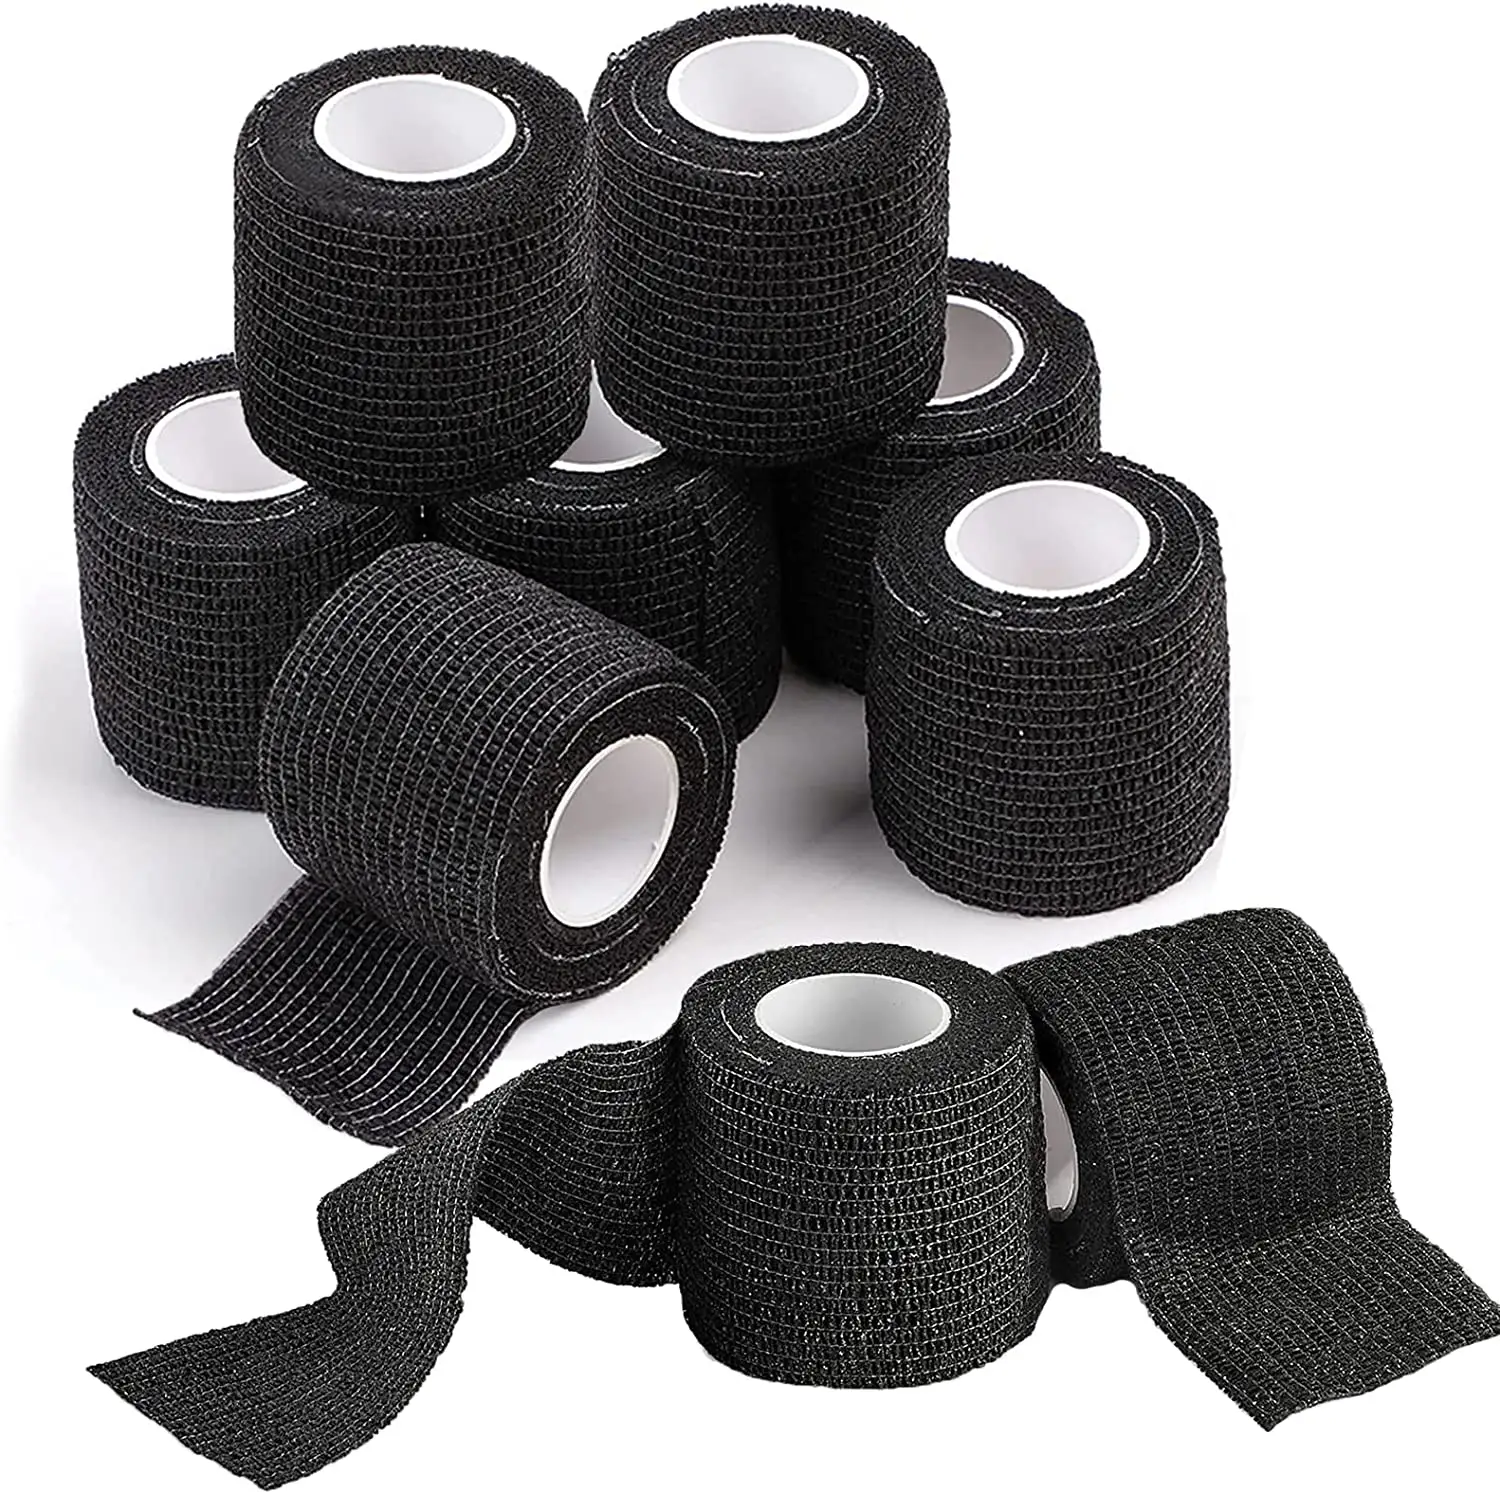 Custom Durable Eco-Friendly Viscoelastic Disposable Grip Cover Black bandage wrap for tattoo machine